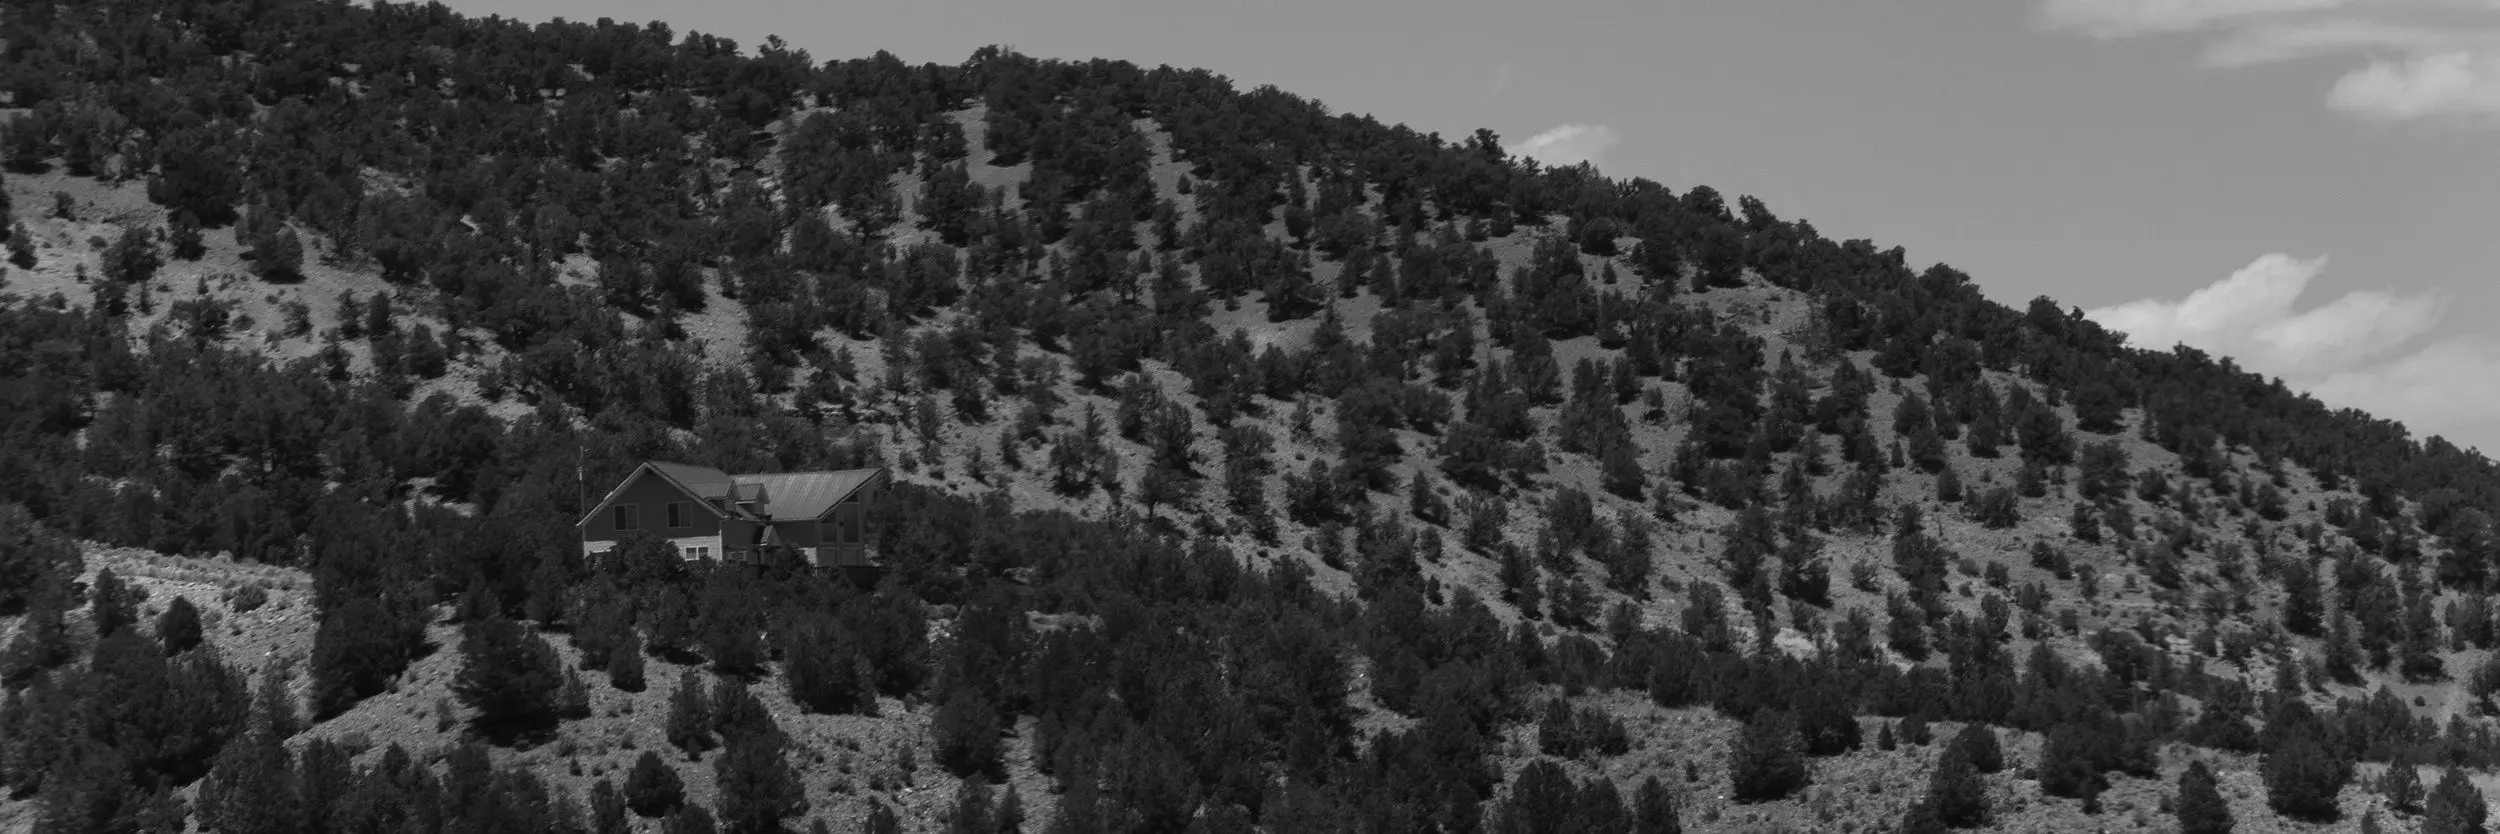 A lone house on a hill dotted with trees. Black and white.